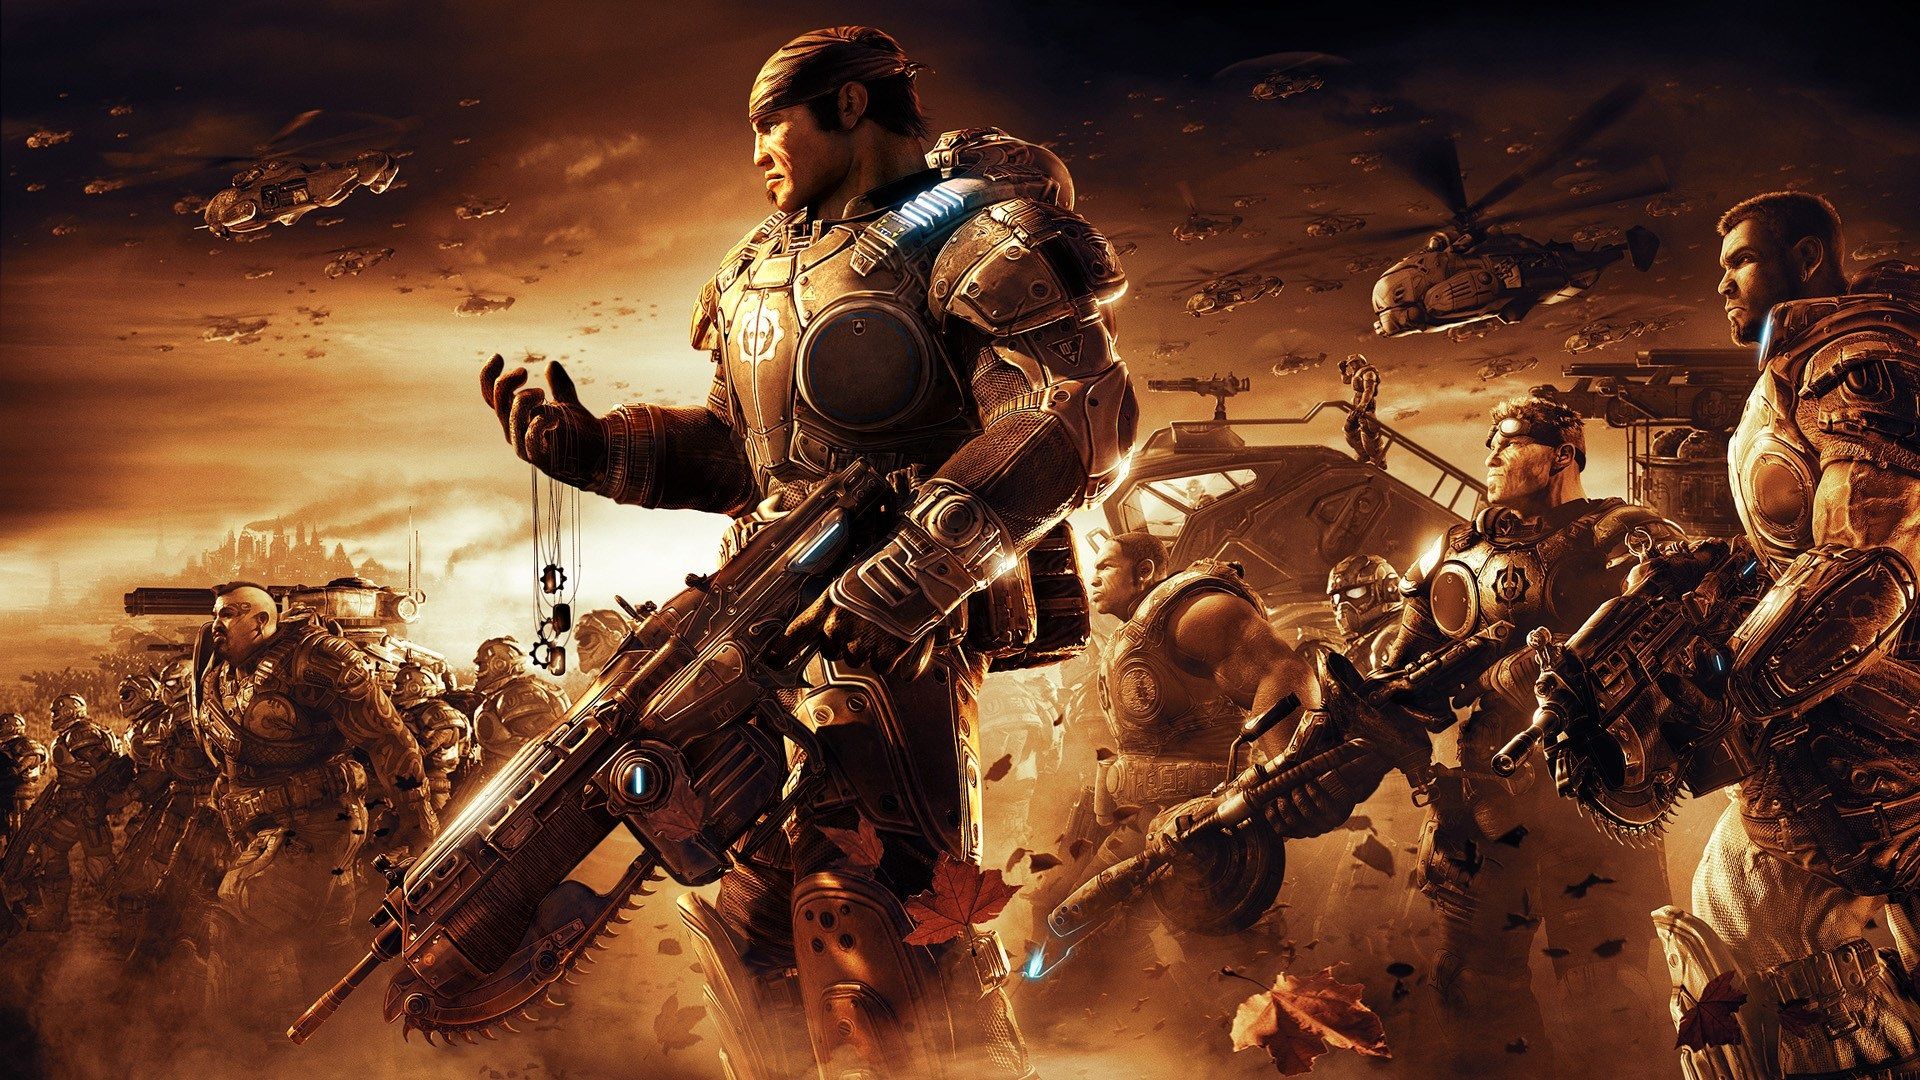 Key art for Gears of War 2 with Marcus Fenix holding a bunch of dog tags in front of an army of soldiers